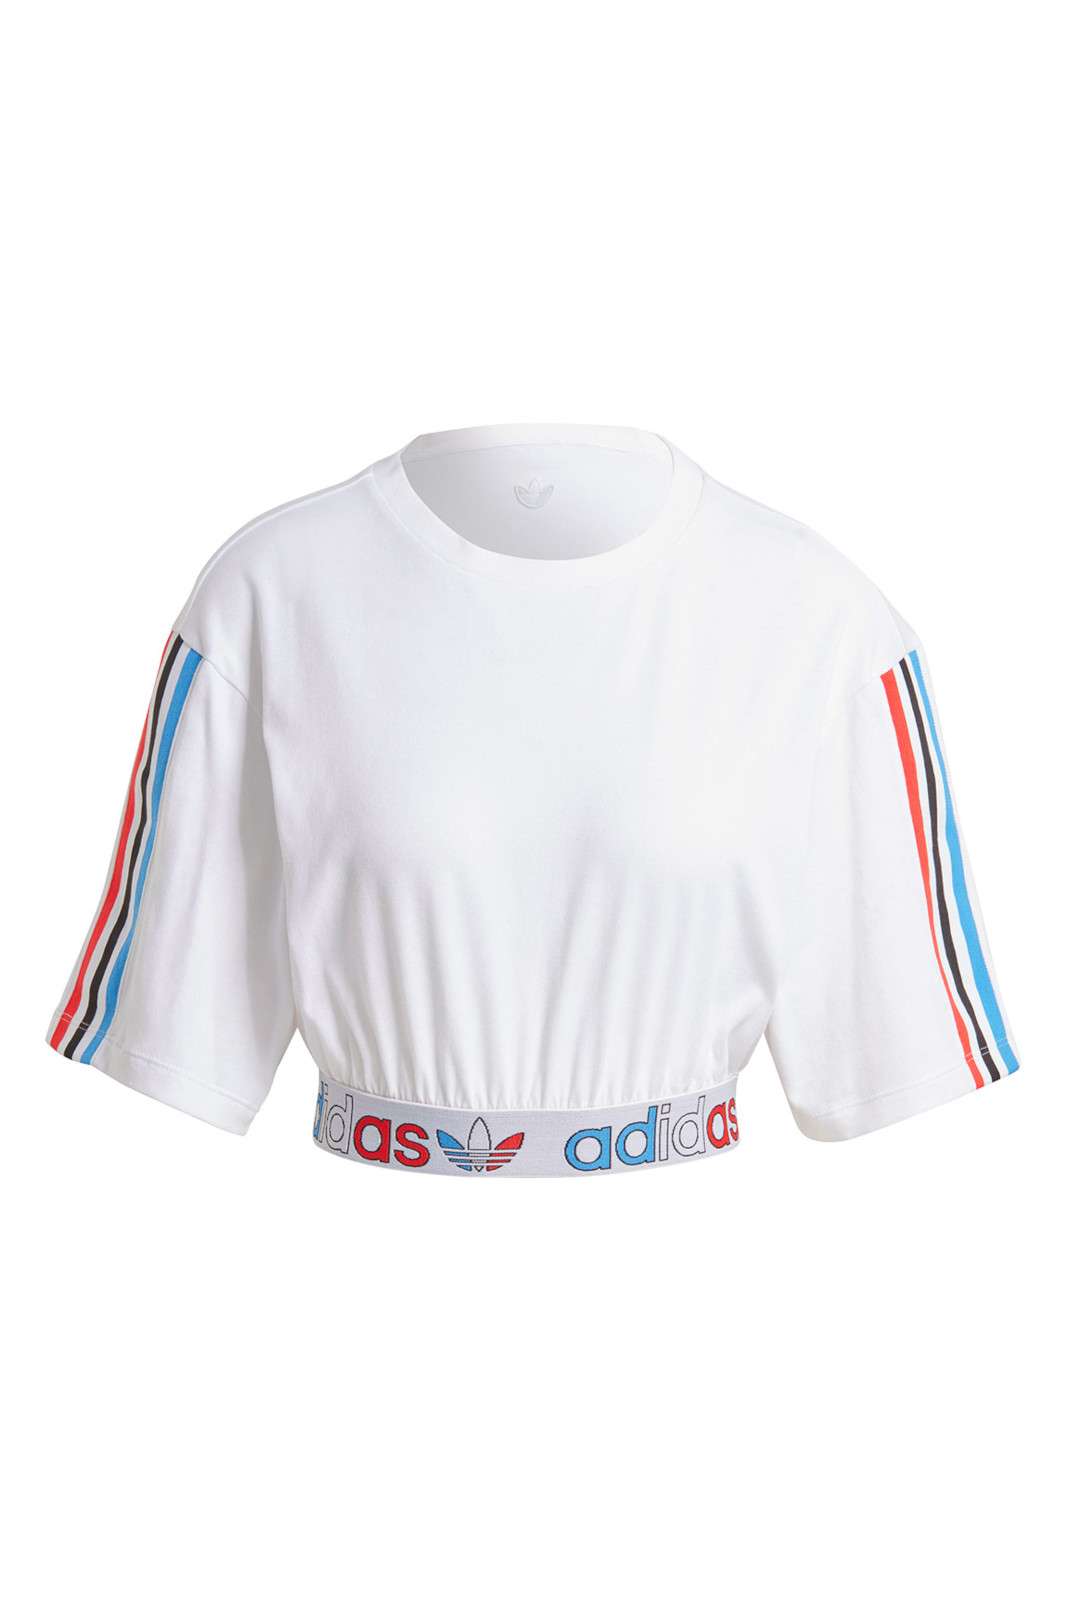 Adidas Women's Top PRIMEBLUE TRICOLOR CROPPED